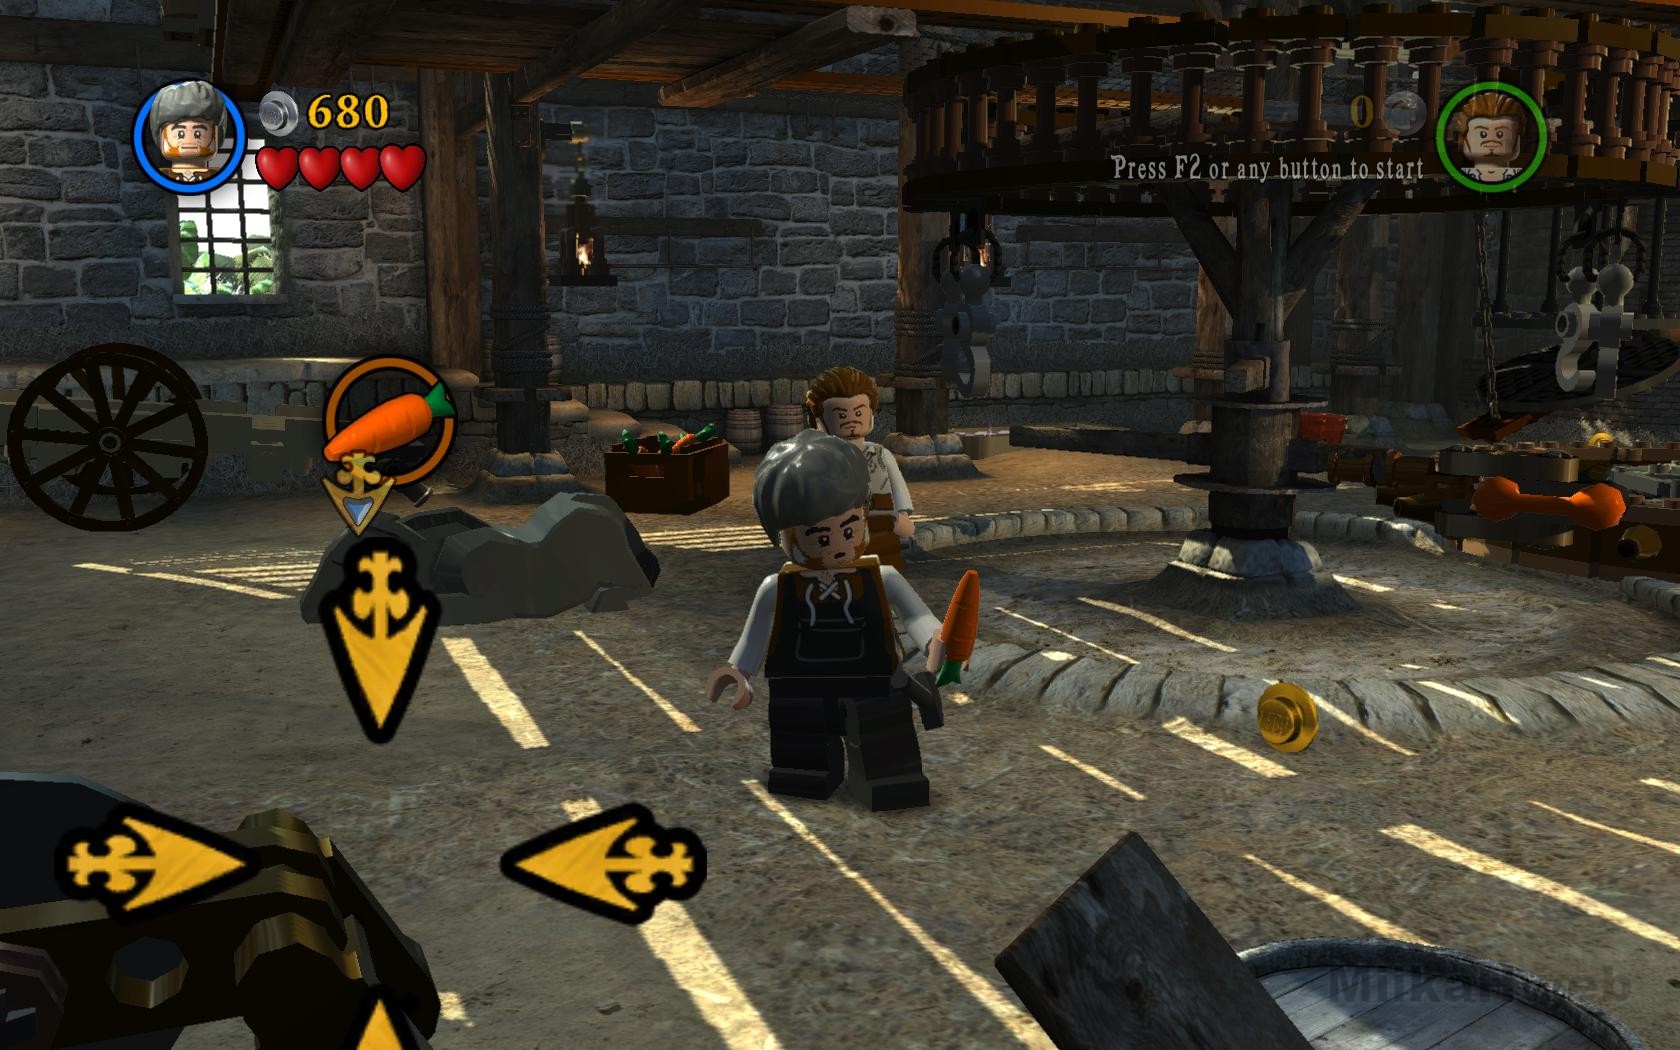 lego pirates of the caribbean pc